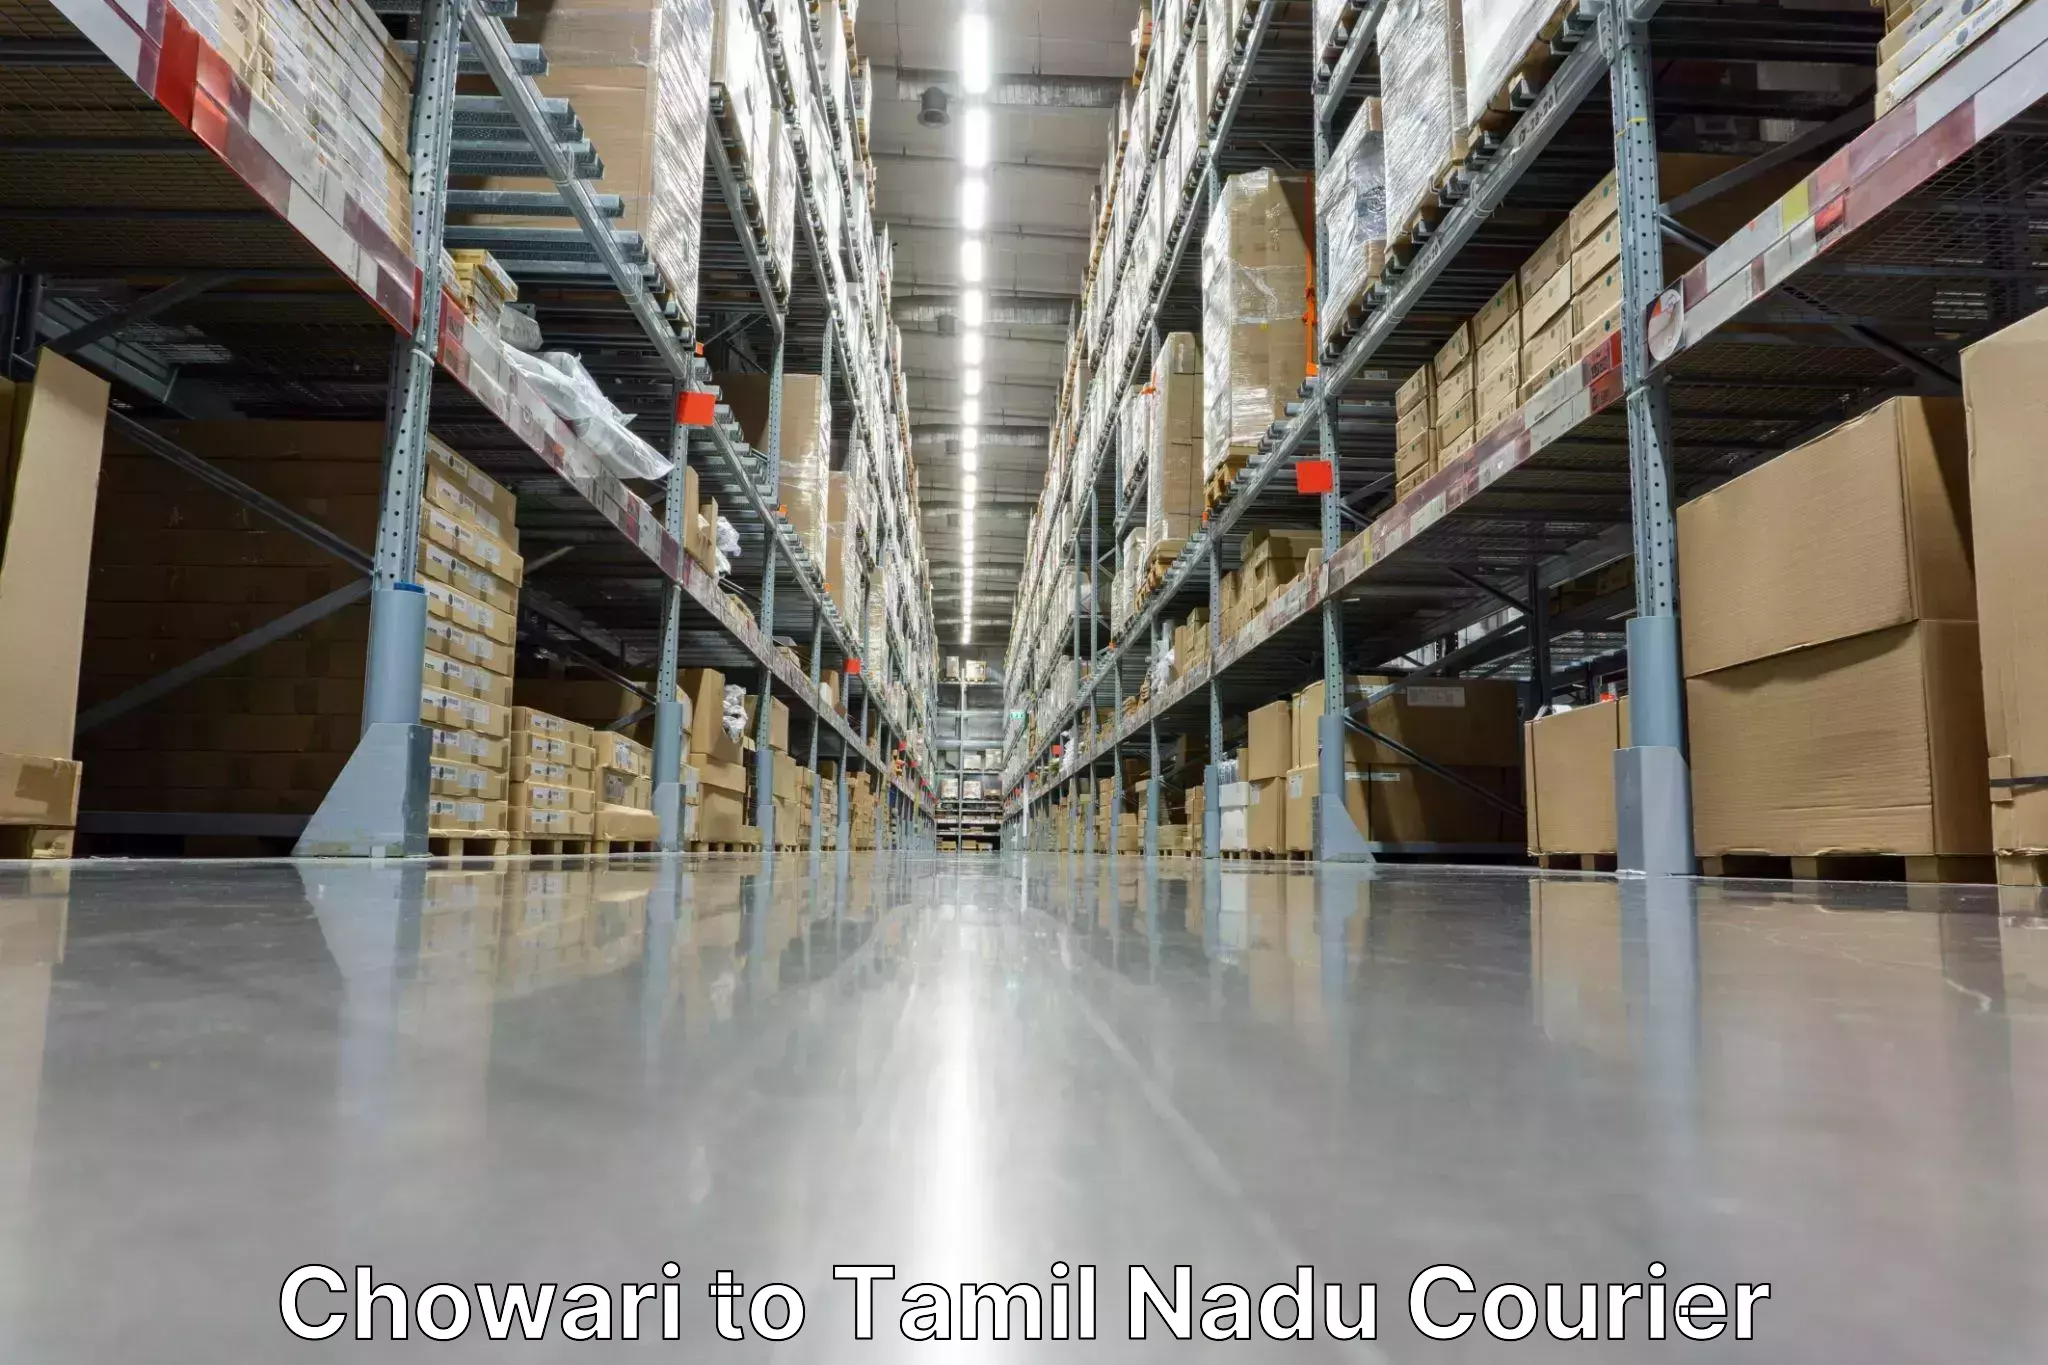 Reliable parcel services Chowari to Chennai Port